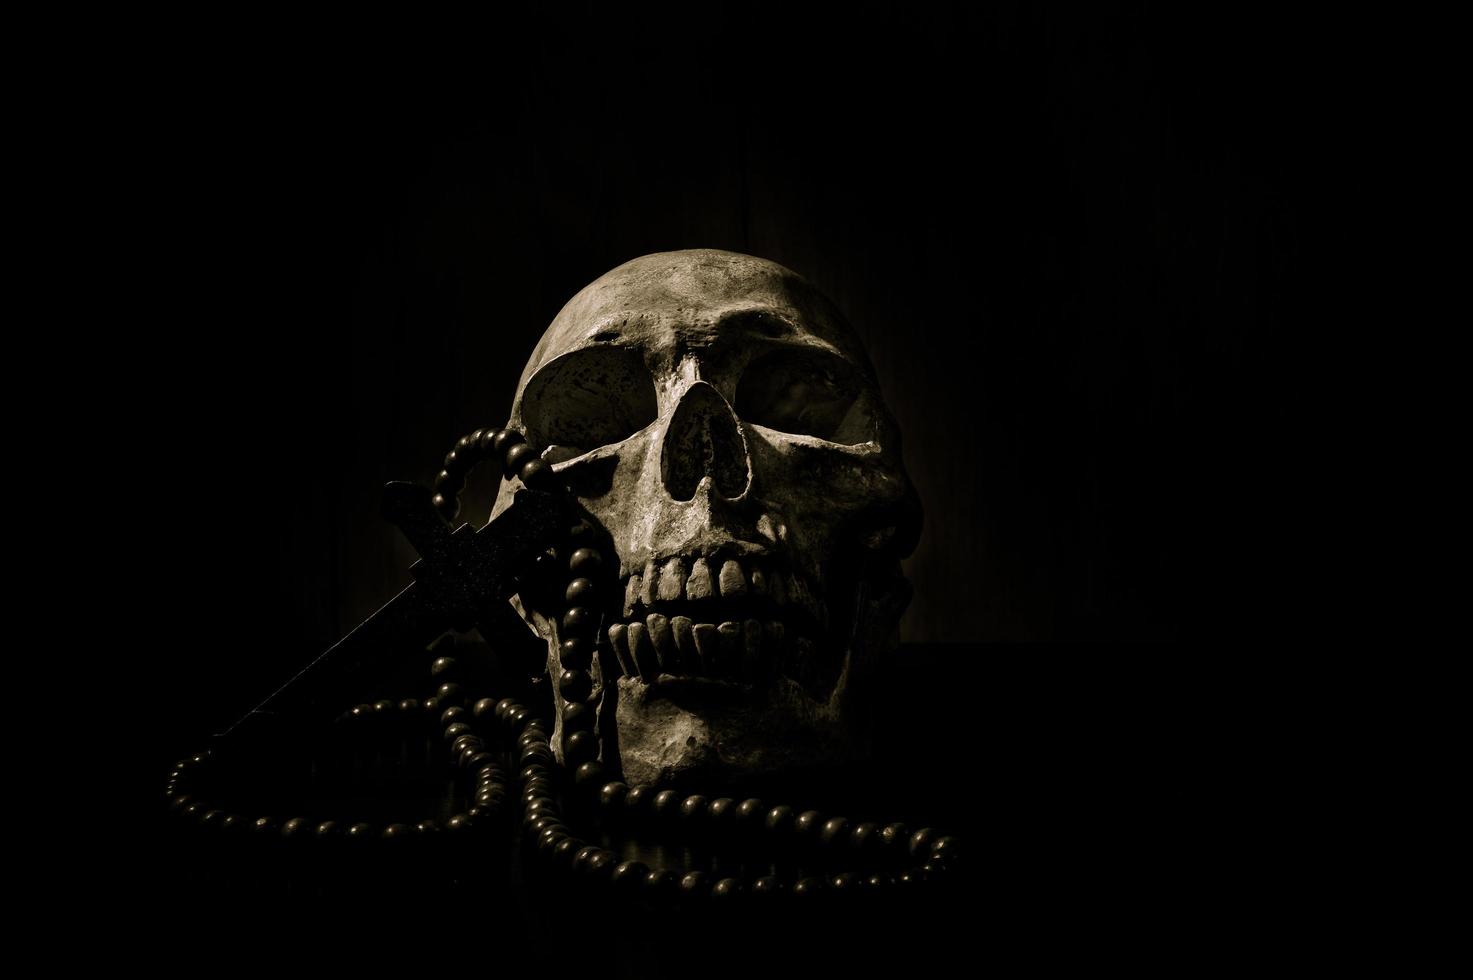 Still life art of a human skull and bead on a black background photo